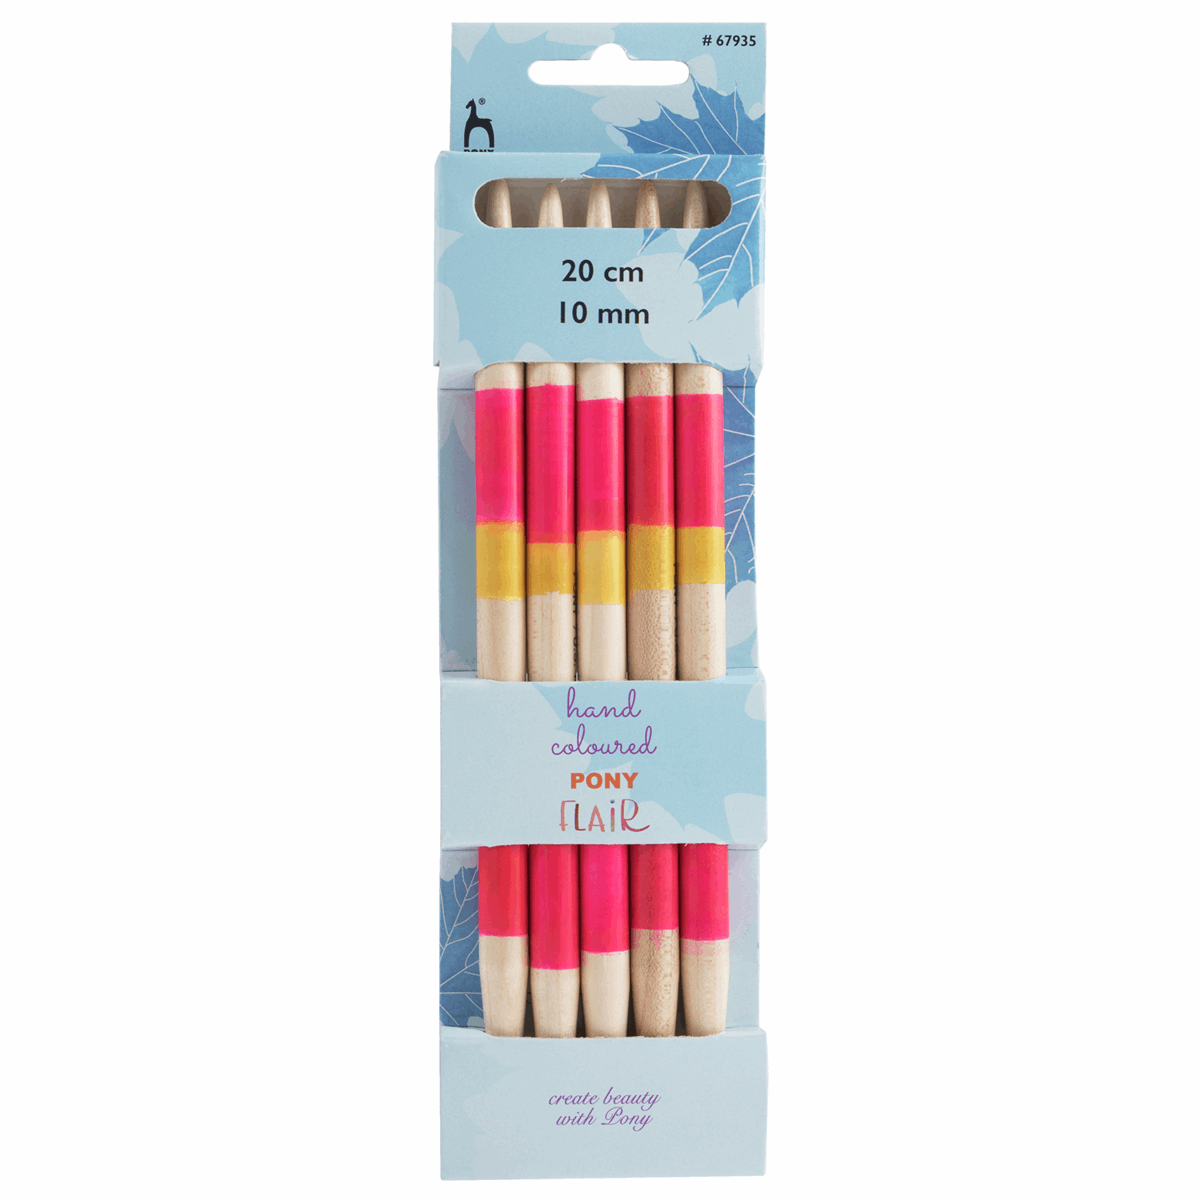 PONY 'Flair' Double-Ended Coloured Knitting Pins - 20cm x 10mm (Set of 5)